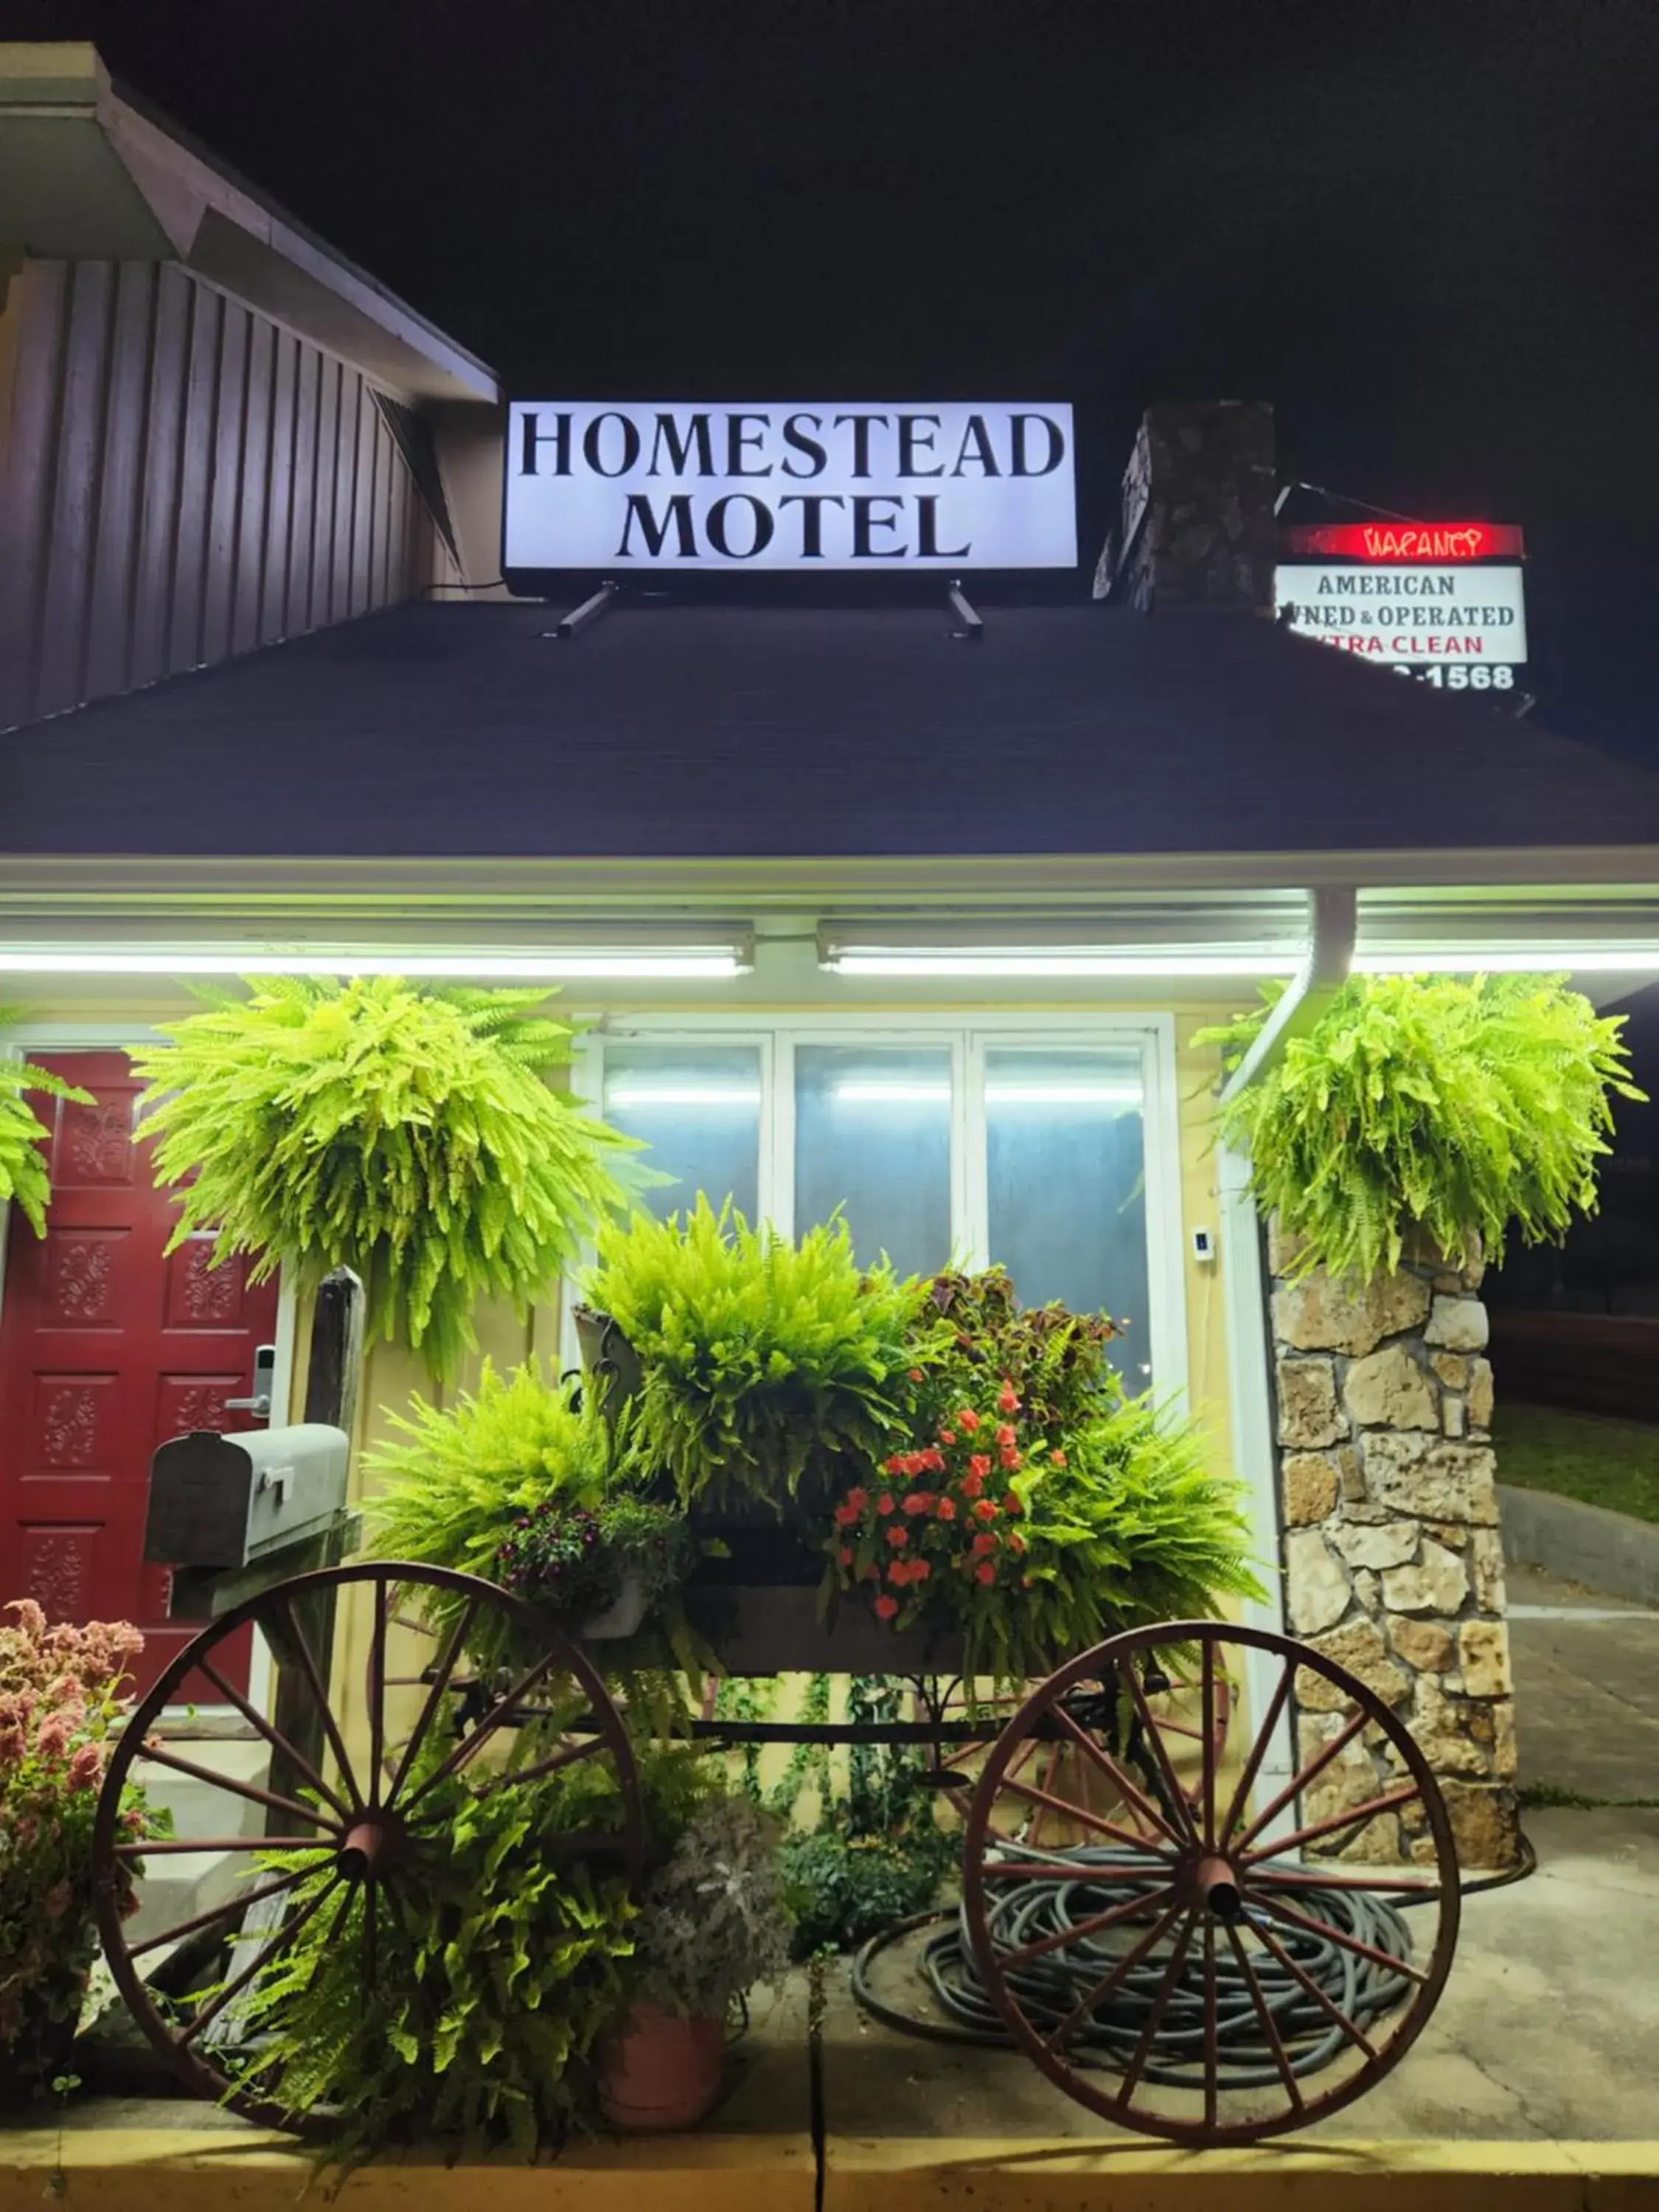 Property building in Homestead Motel